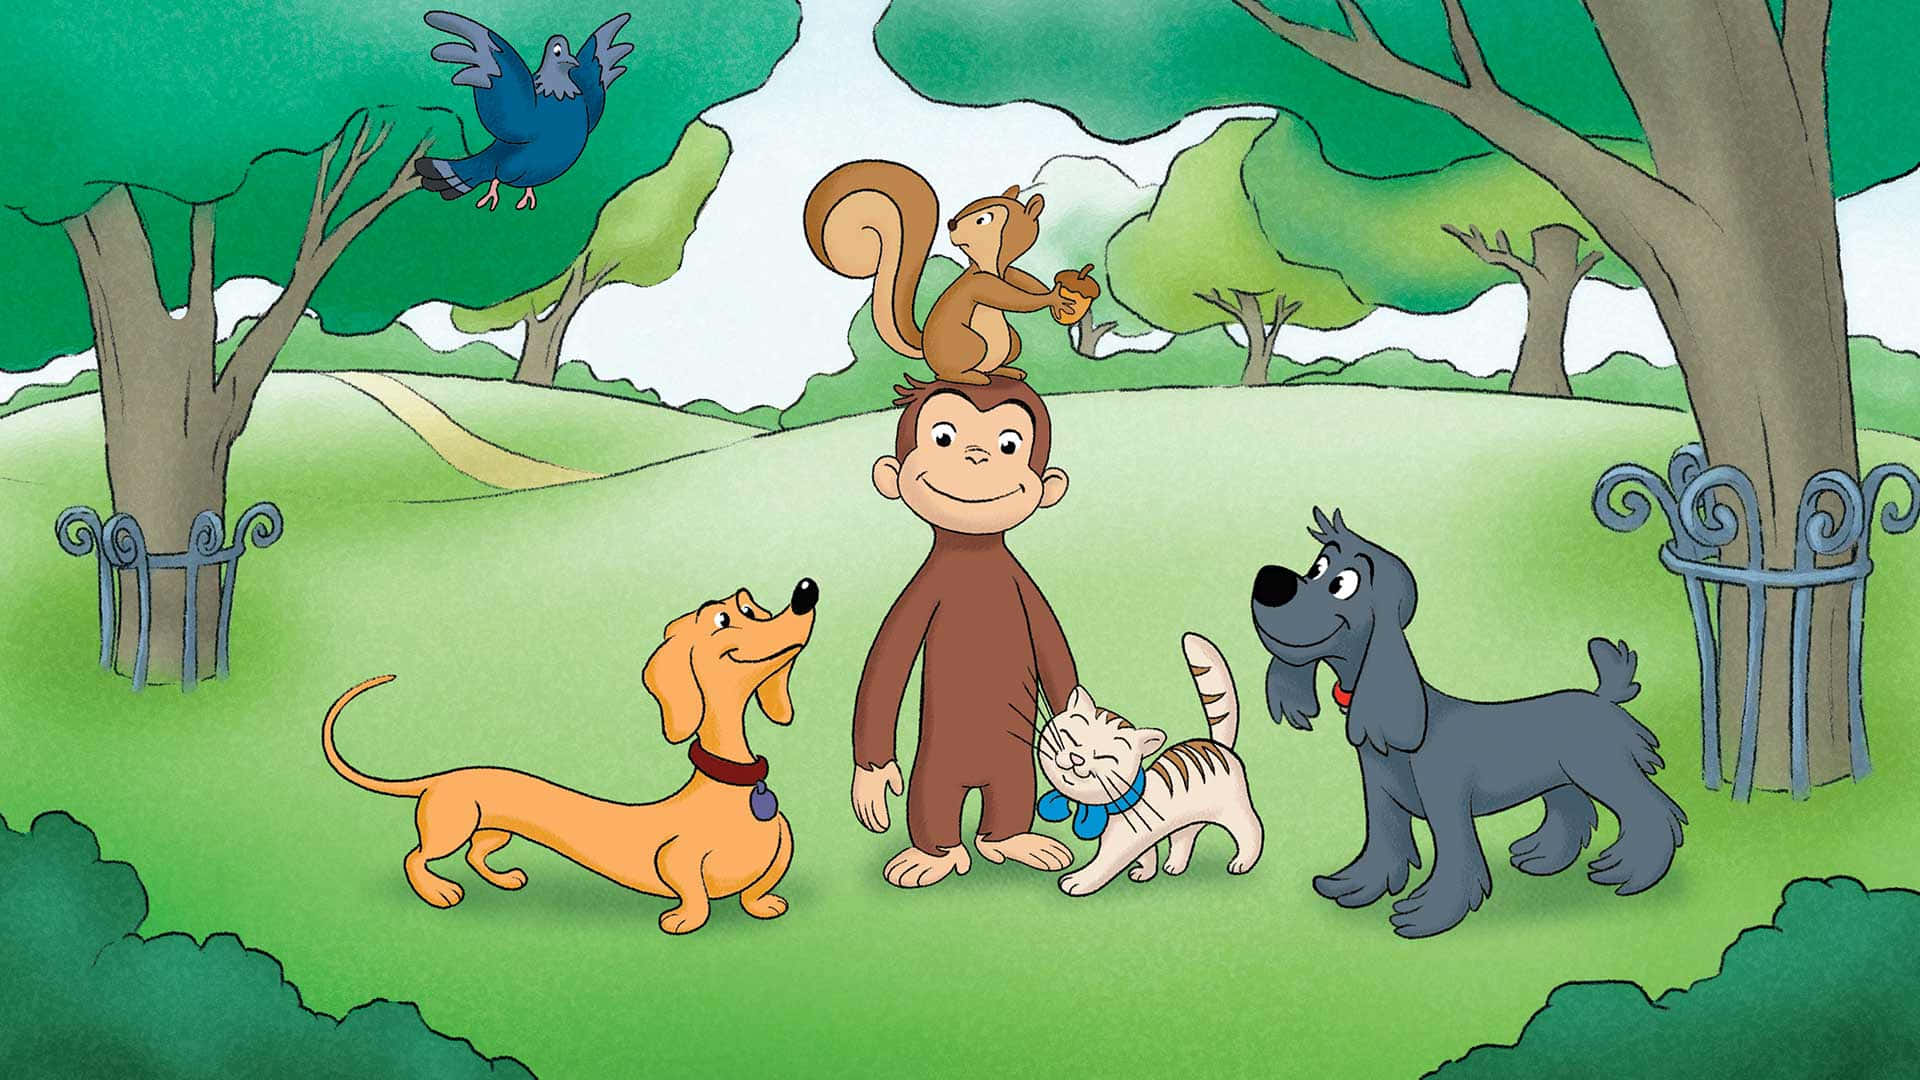 "Curious George, Where Are You Headed Next?"